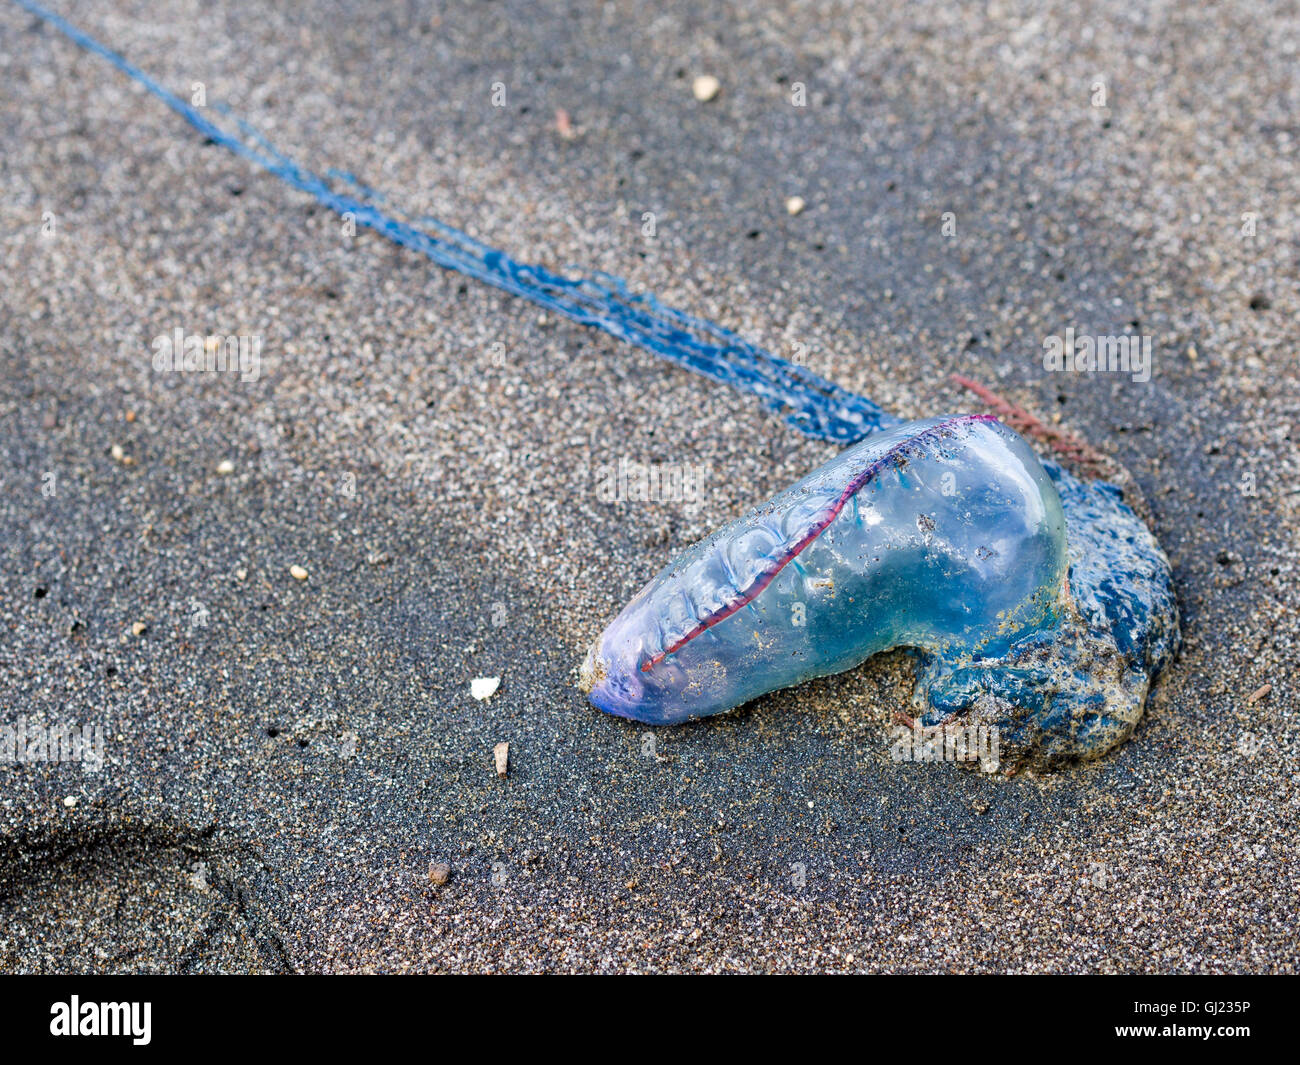 Man Of War Jelly Fish High Resolution Stock Photography And Images Alamy